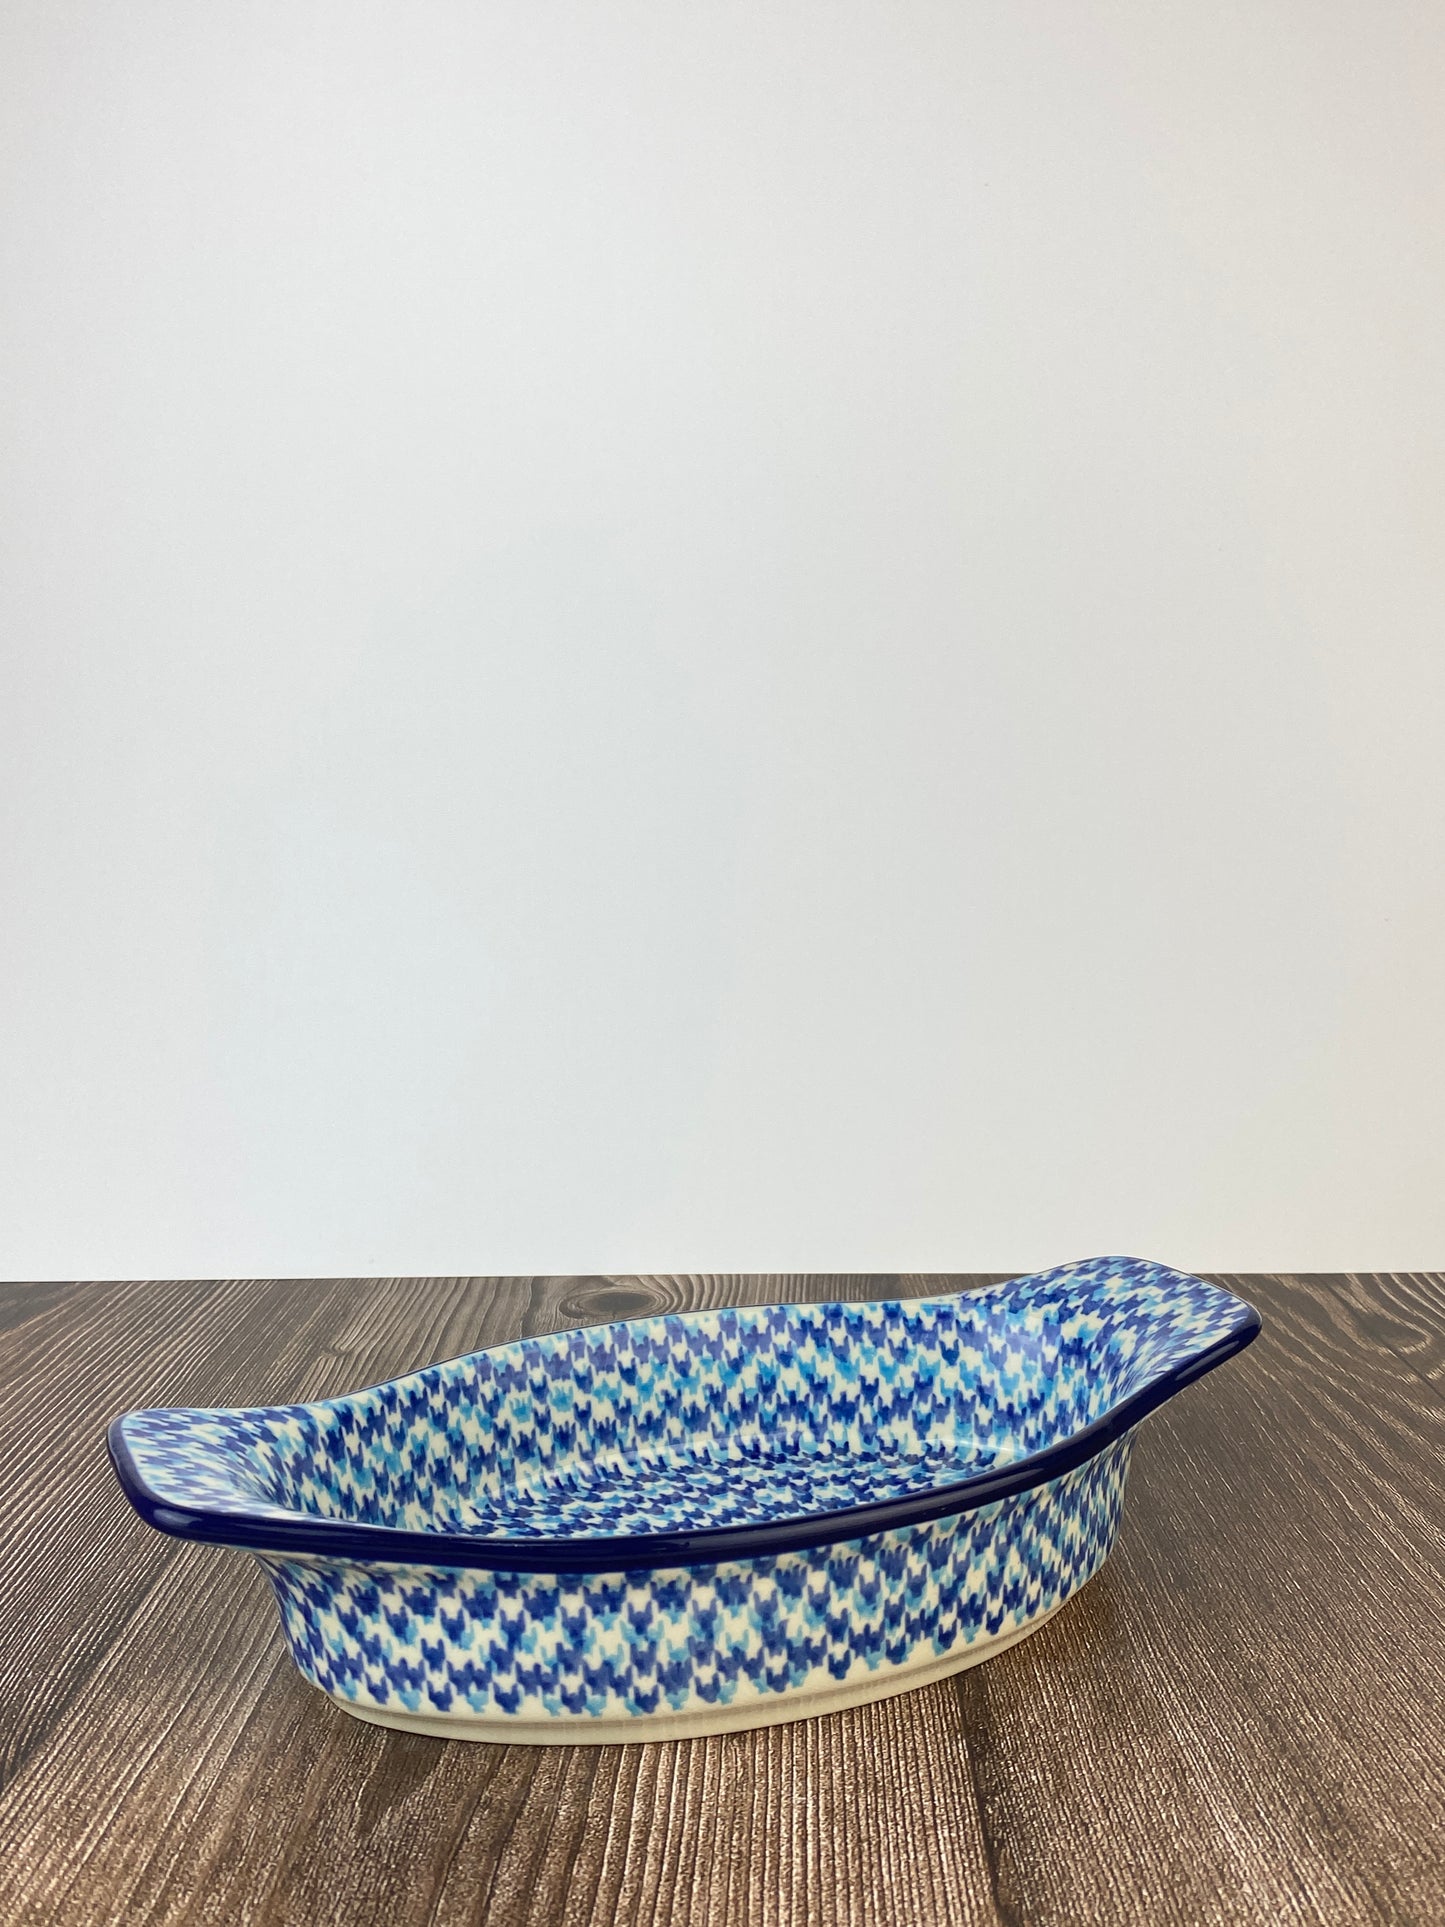 SALE Oval Baker with Handles - Shape A32  - Pattern 2299